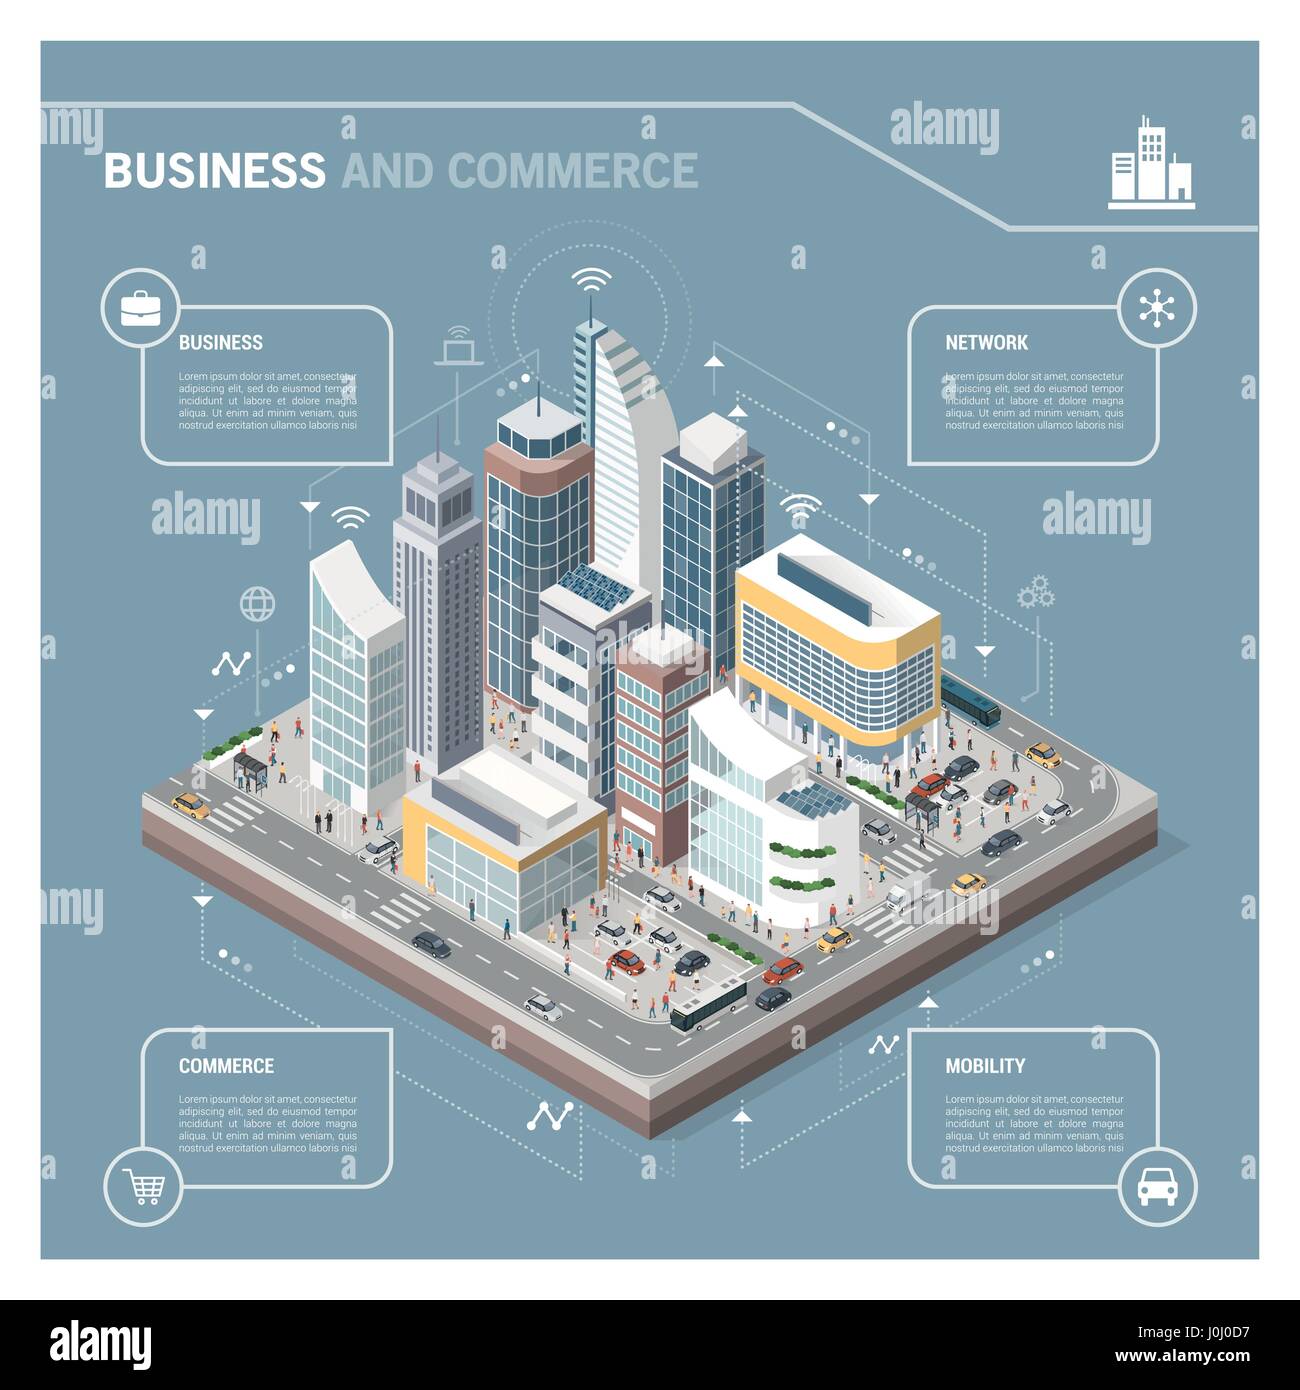 Isometric vector city with skyscrapers, people, streets and vehicles, commercial and business area infographic with icons Stock Vector